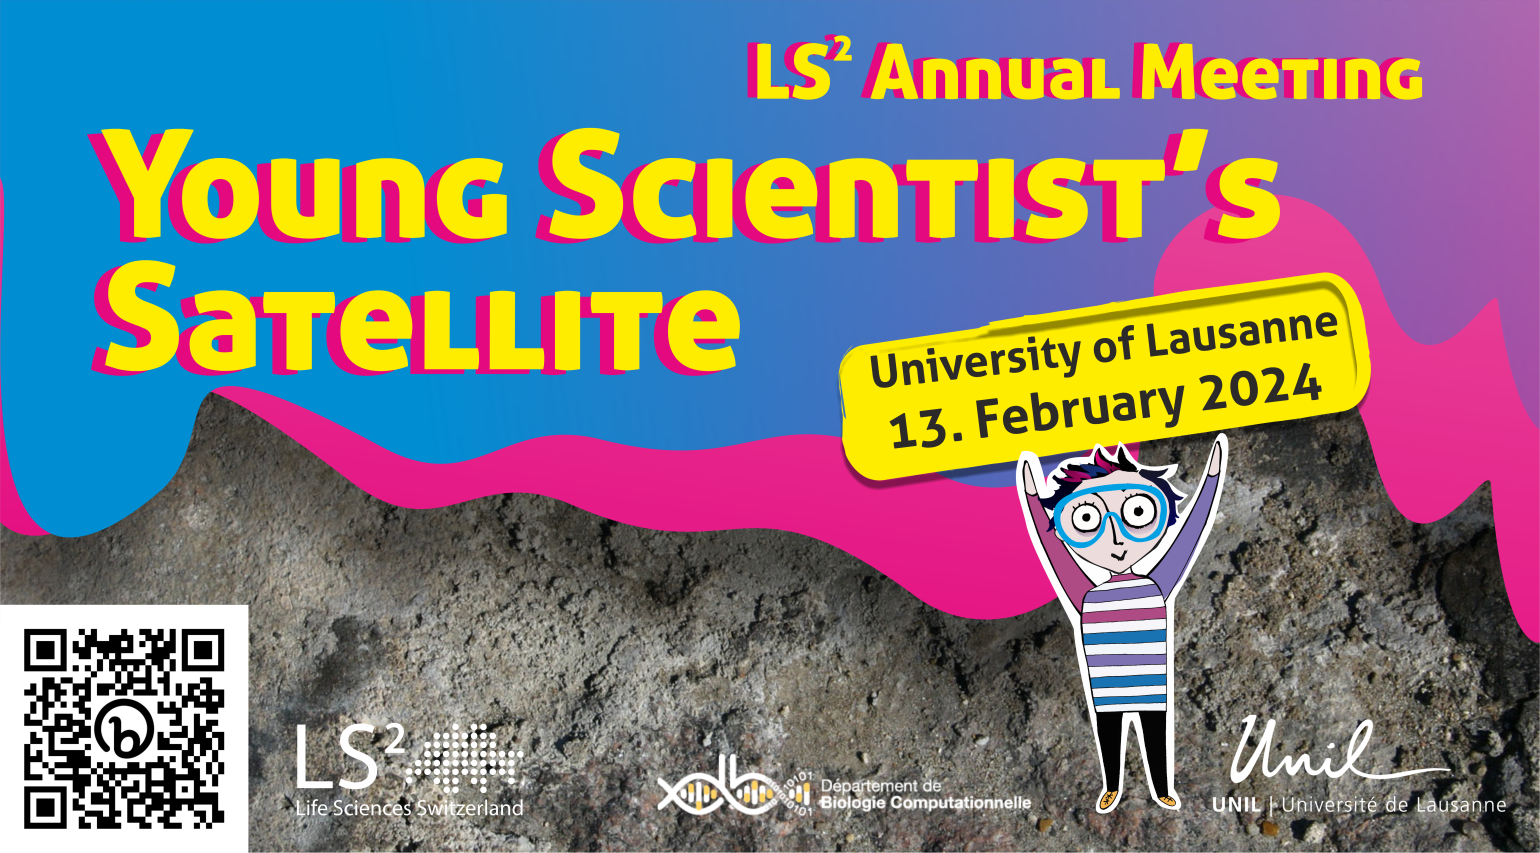 Young Scientists' Satellite LS2 Annual Meeting 2024